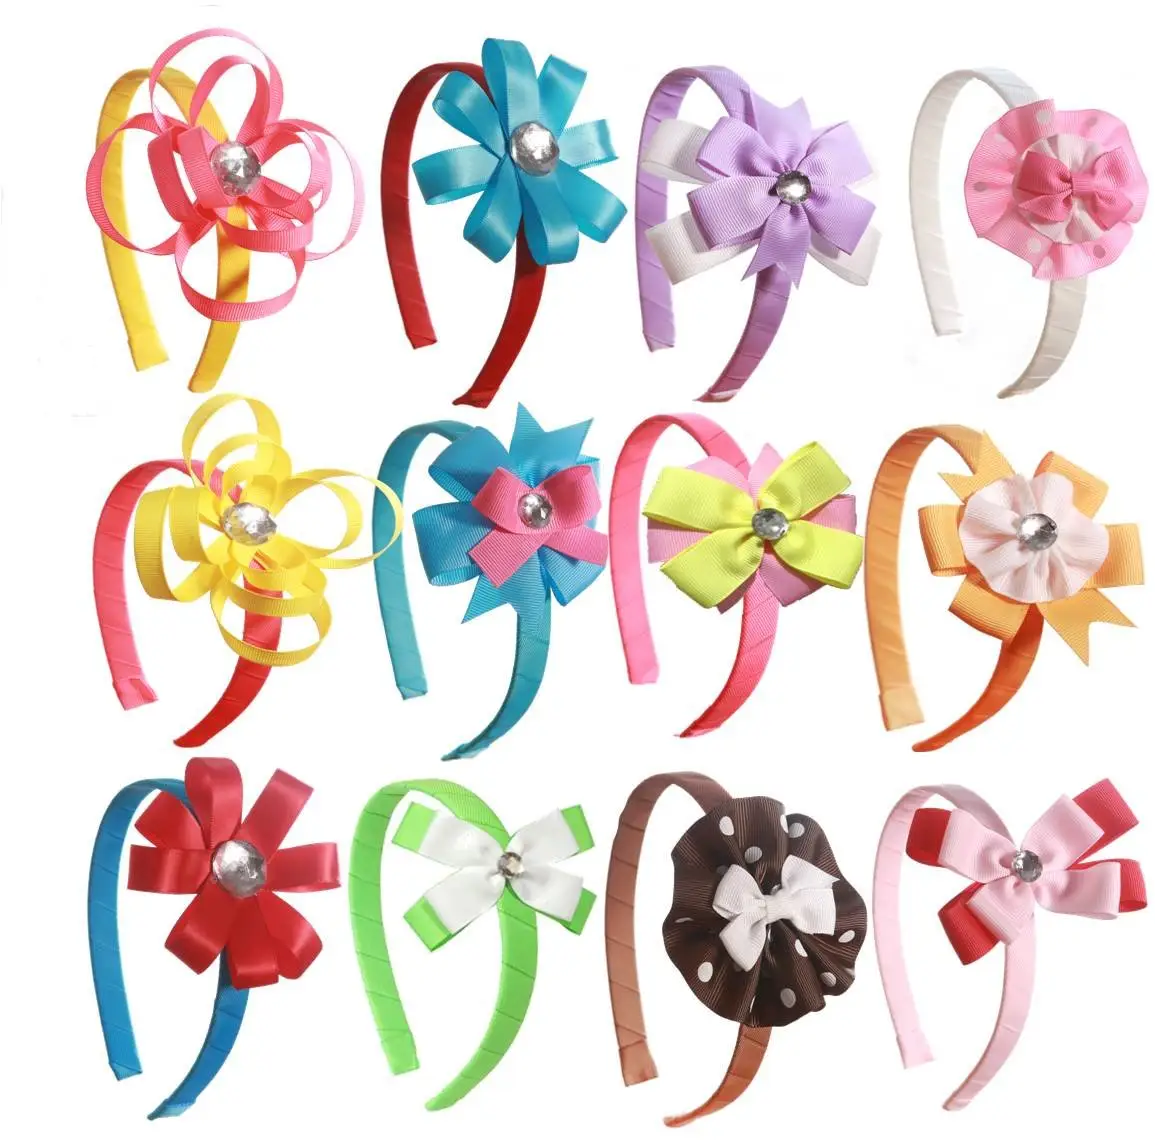 DIY Headband Girl Handmade Craft Kit With Flower Decoration For Girls 6 to 8 Years Old